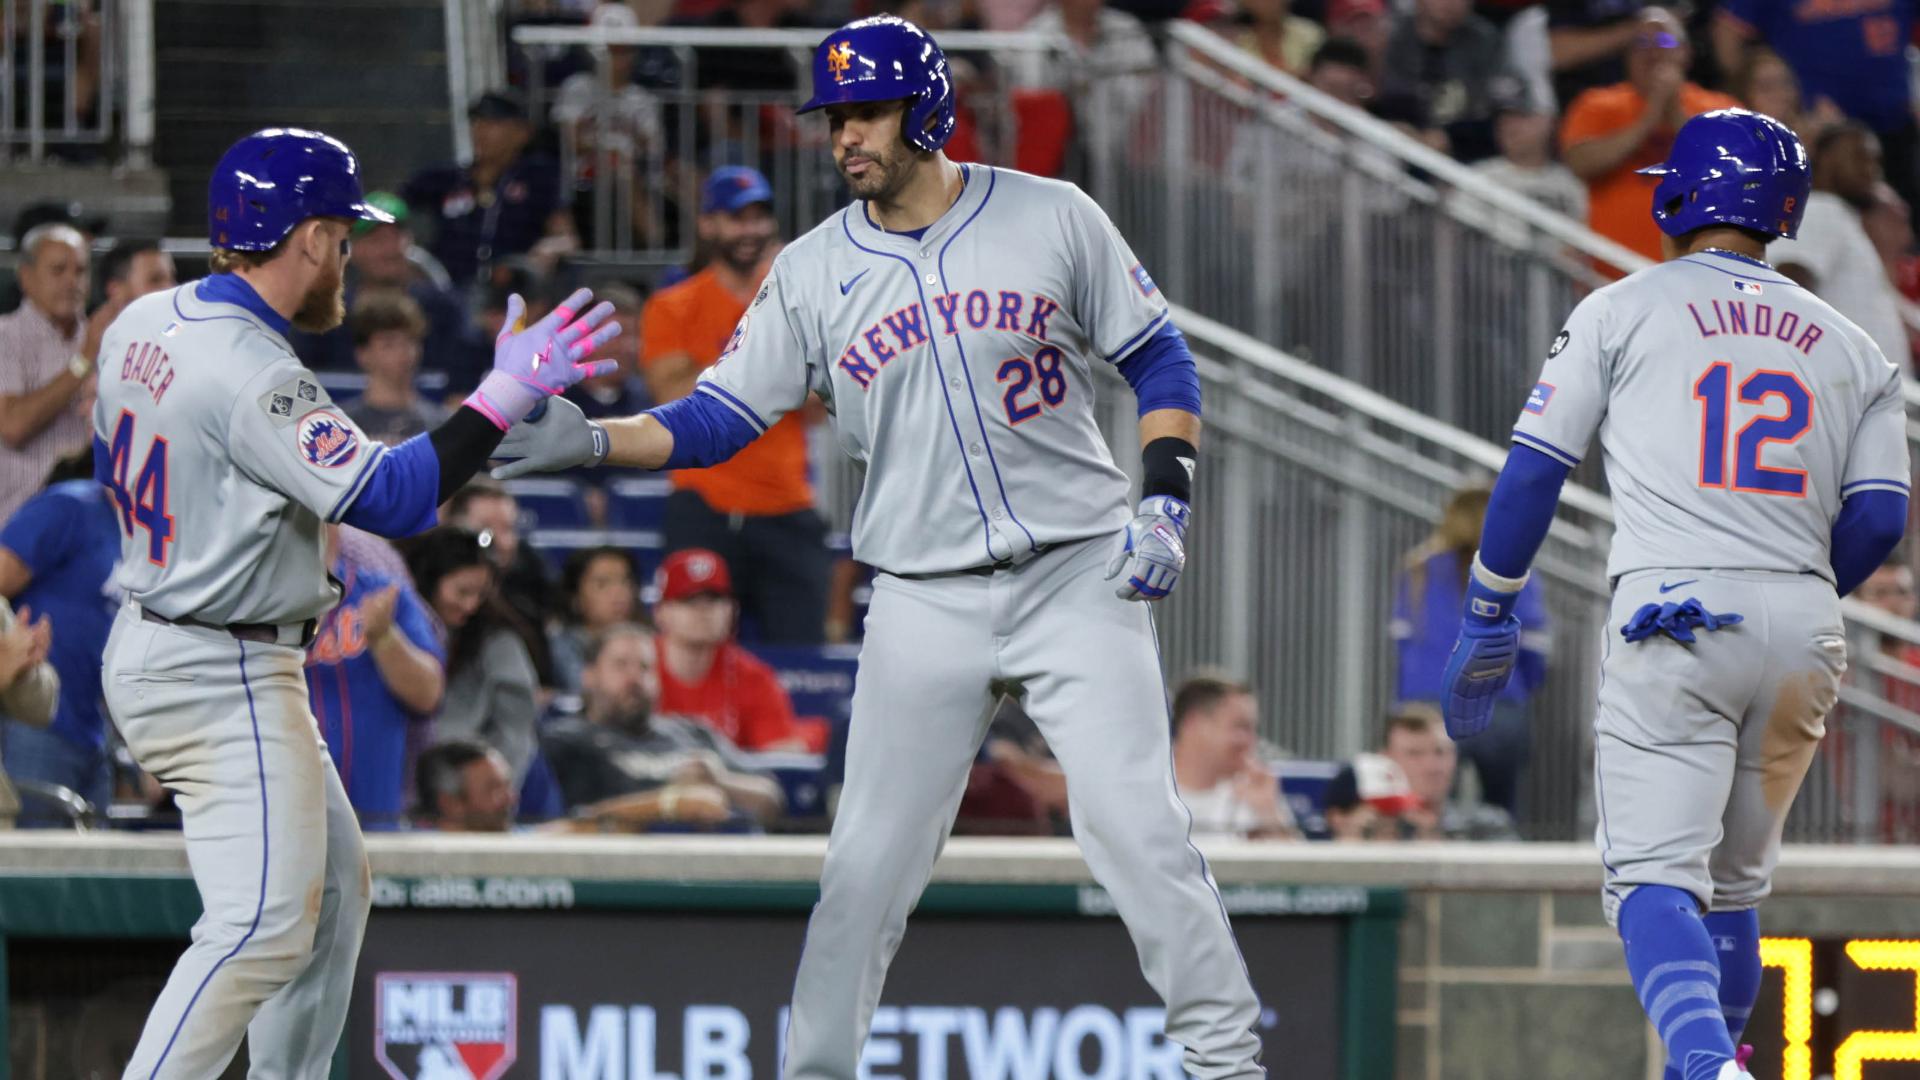 Mets hold off Nationals in wild extra-innings affair